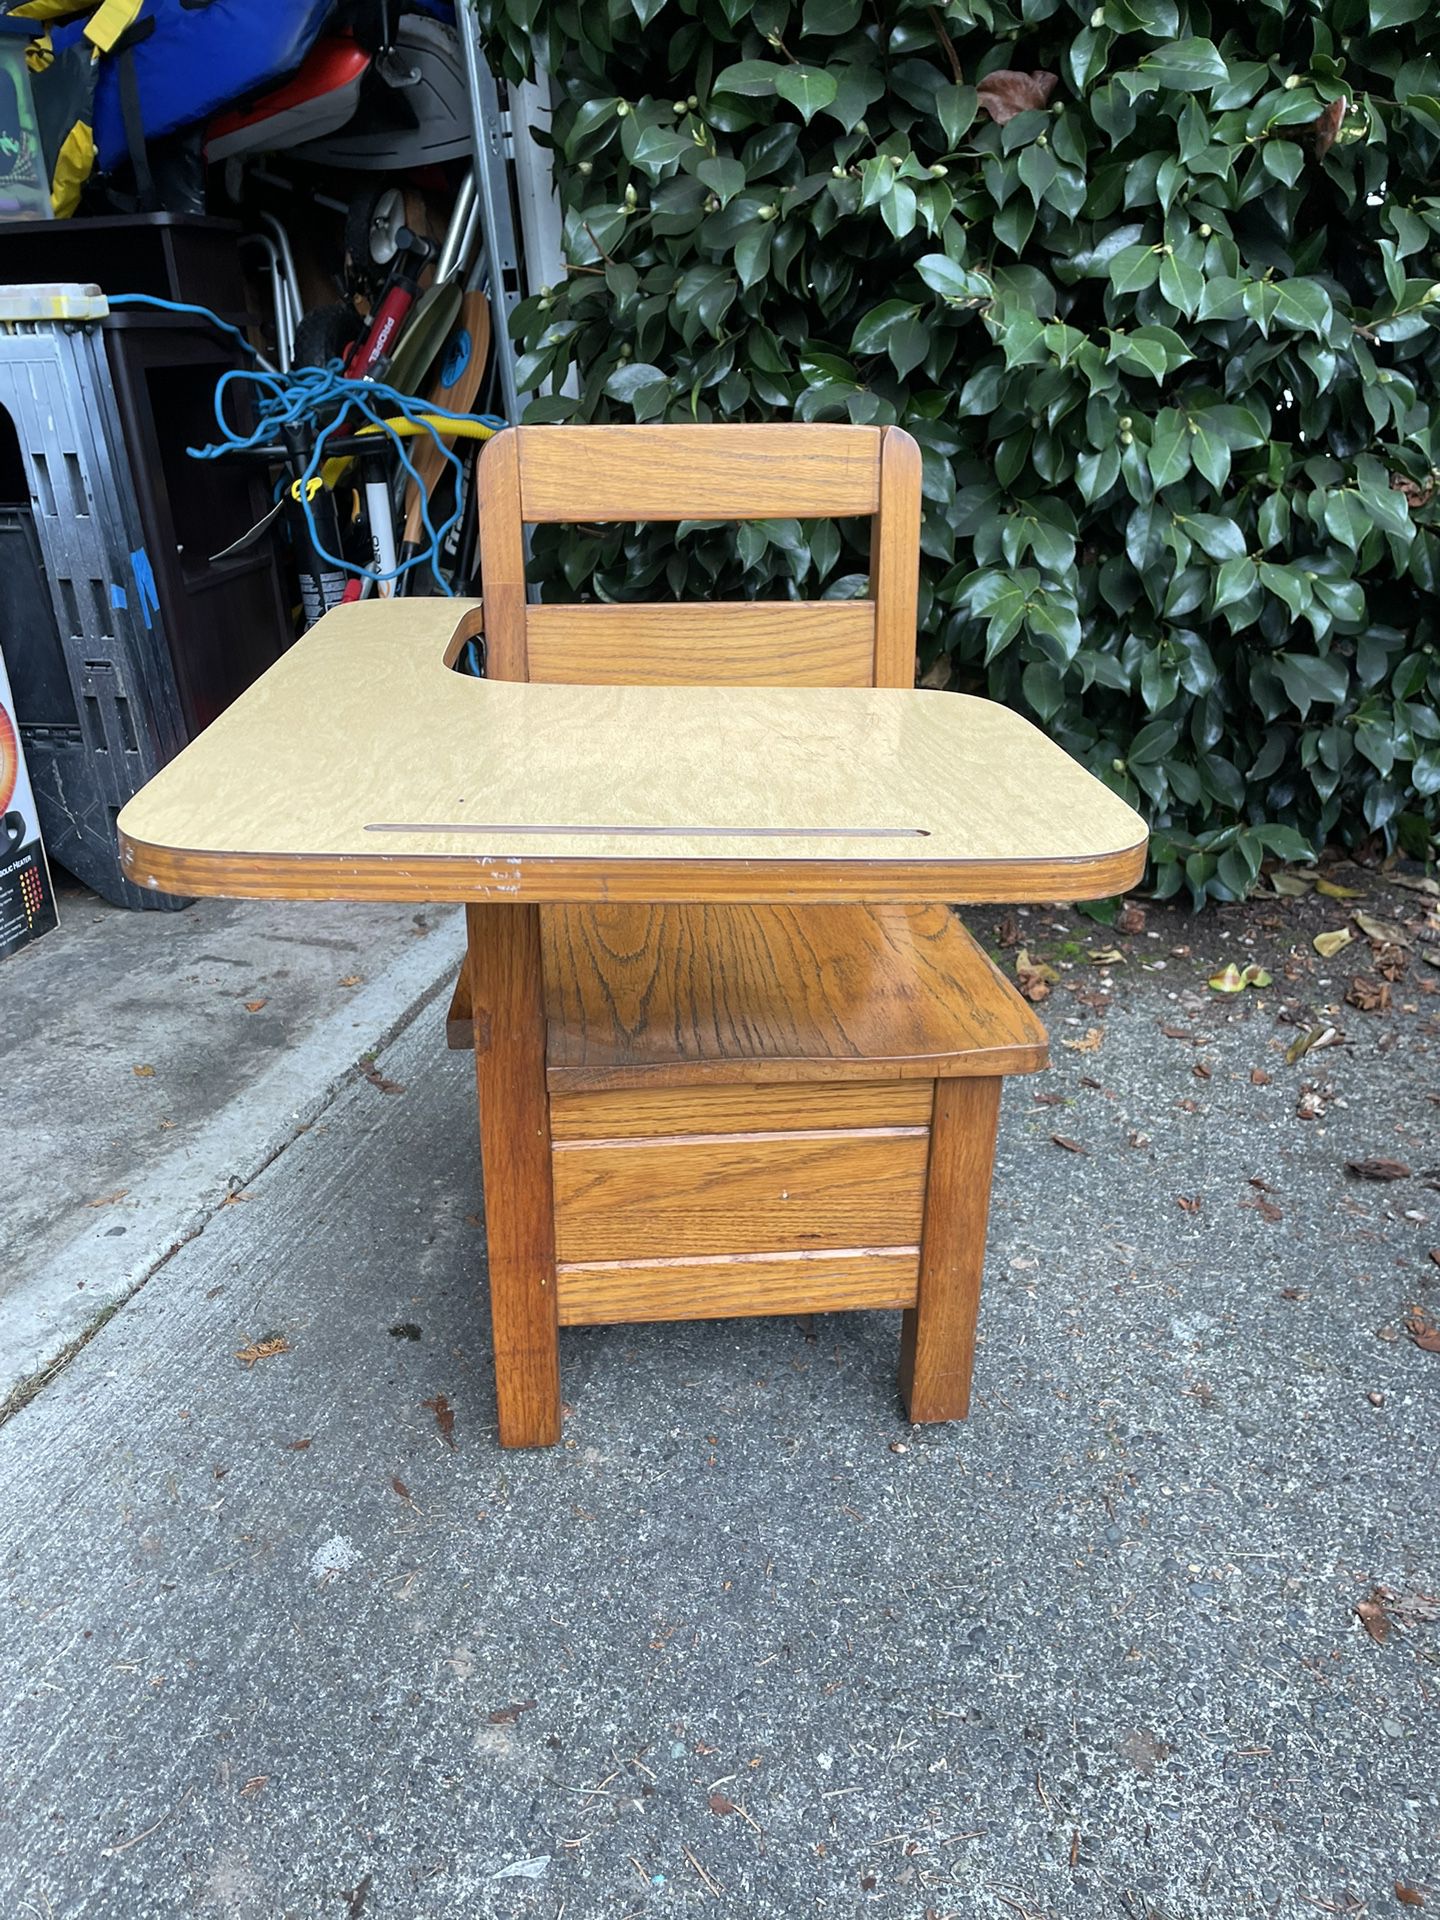 old fashioned children’s chair and desk